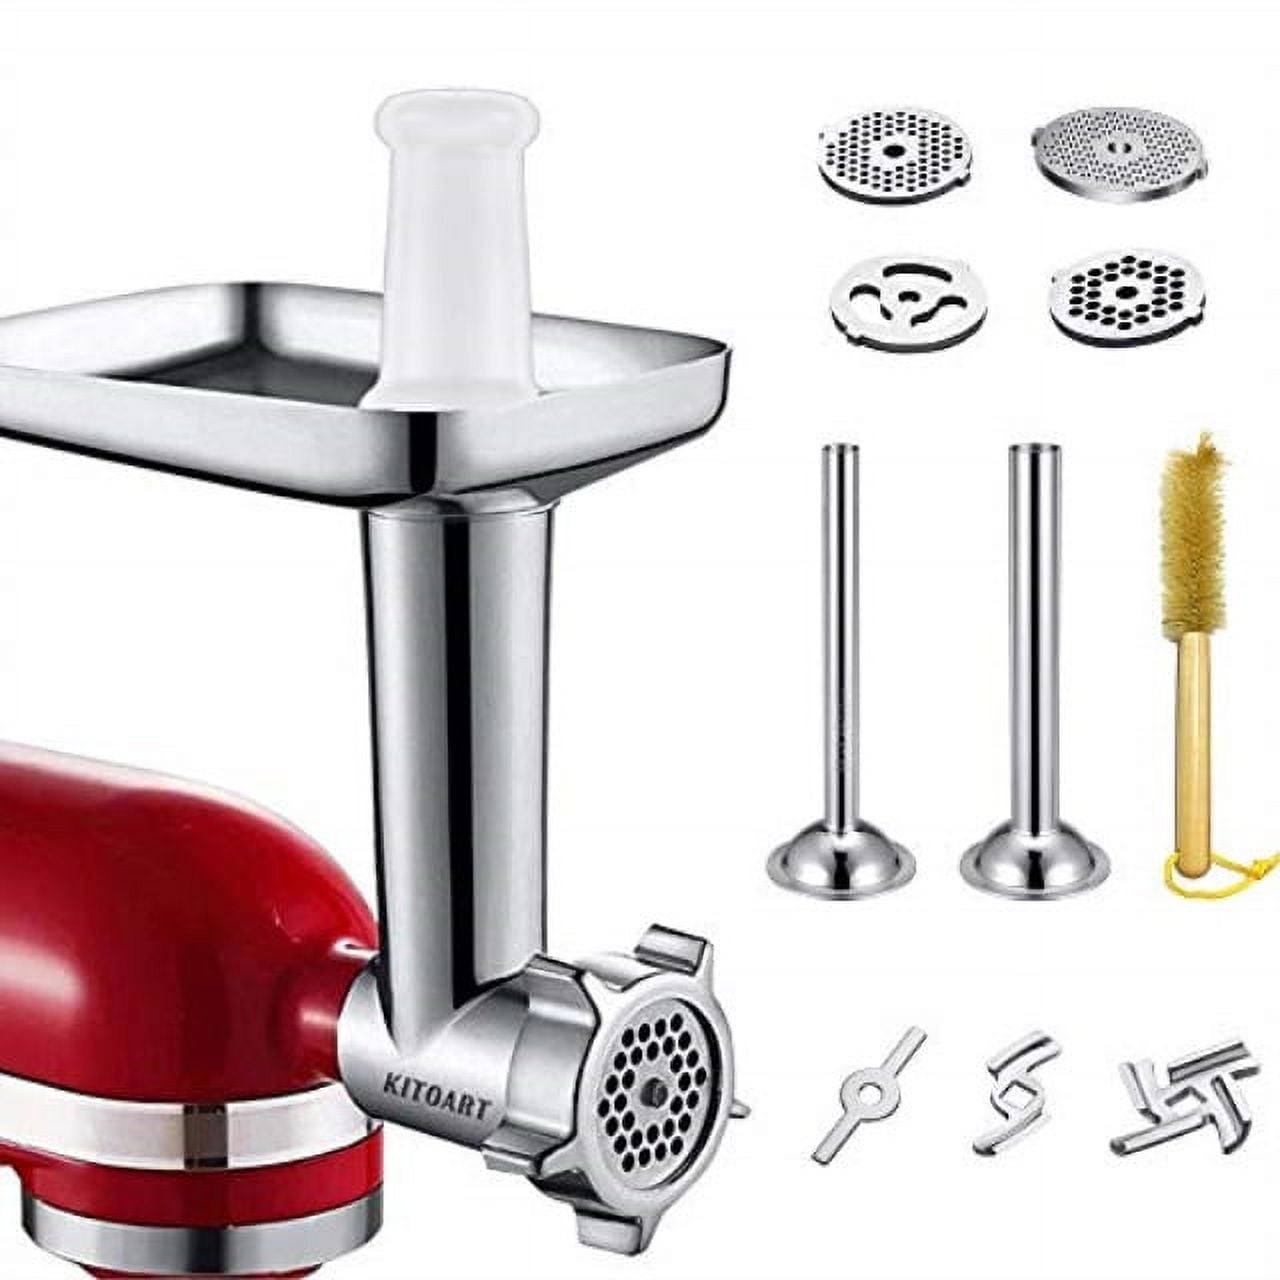 Includes Food Grinder Attachment and Sausage Stuffer Tubes, Compatible with KitchenAid  Stand Mixers